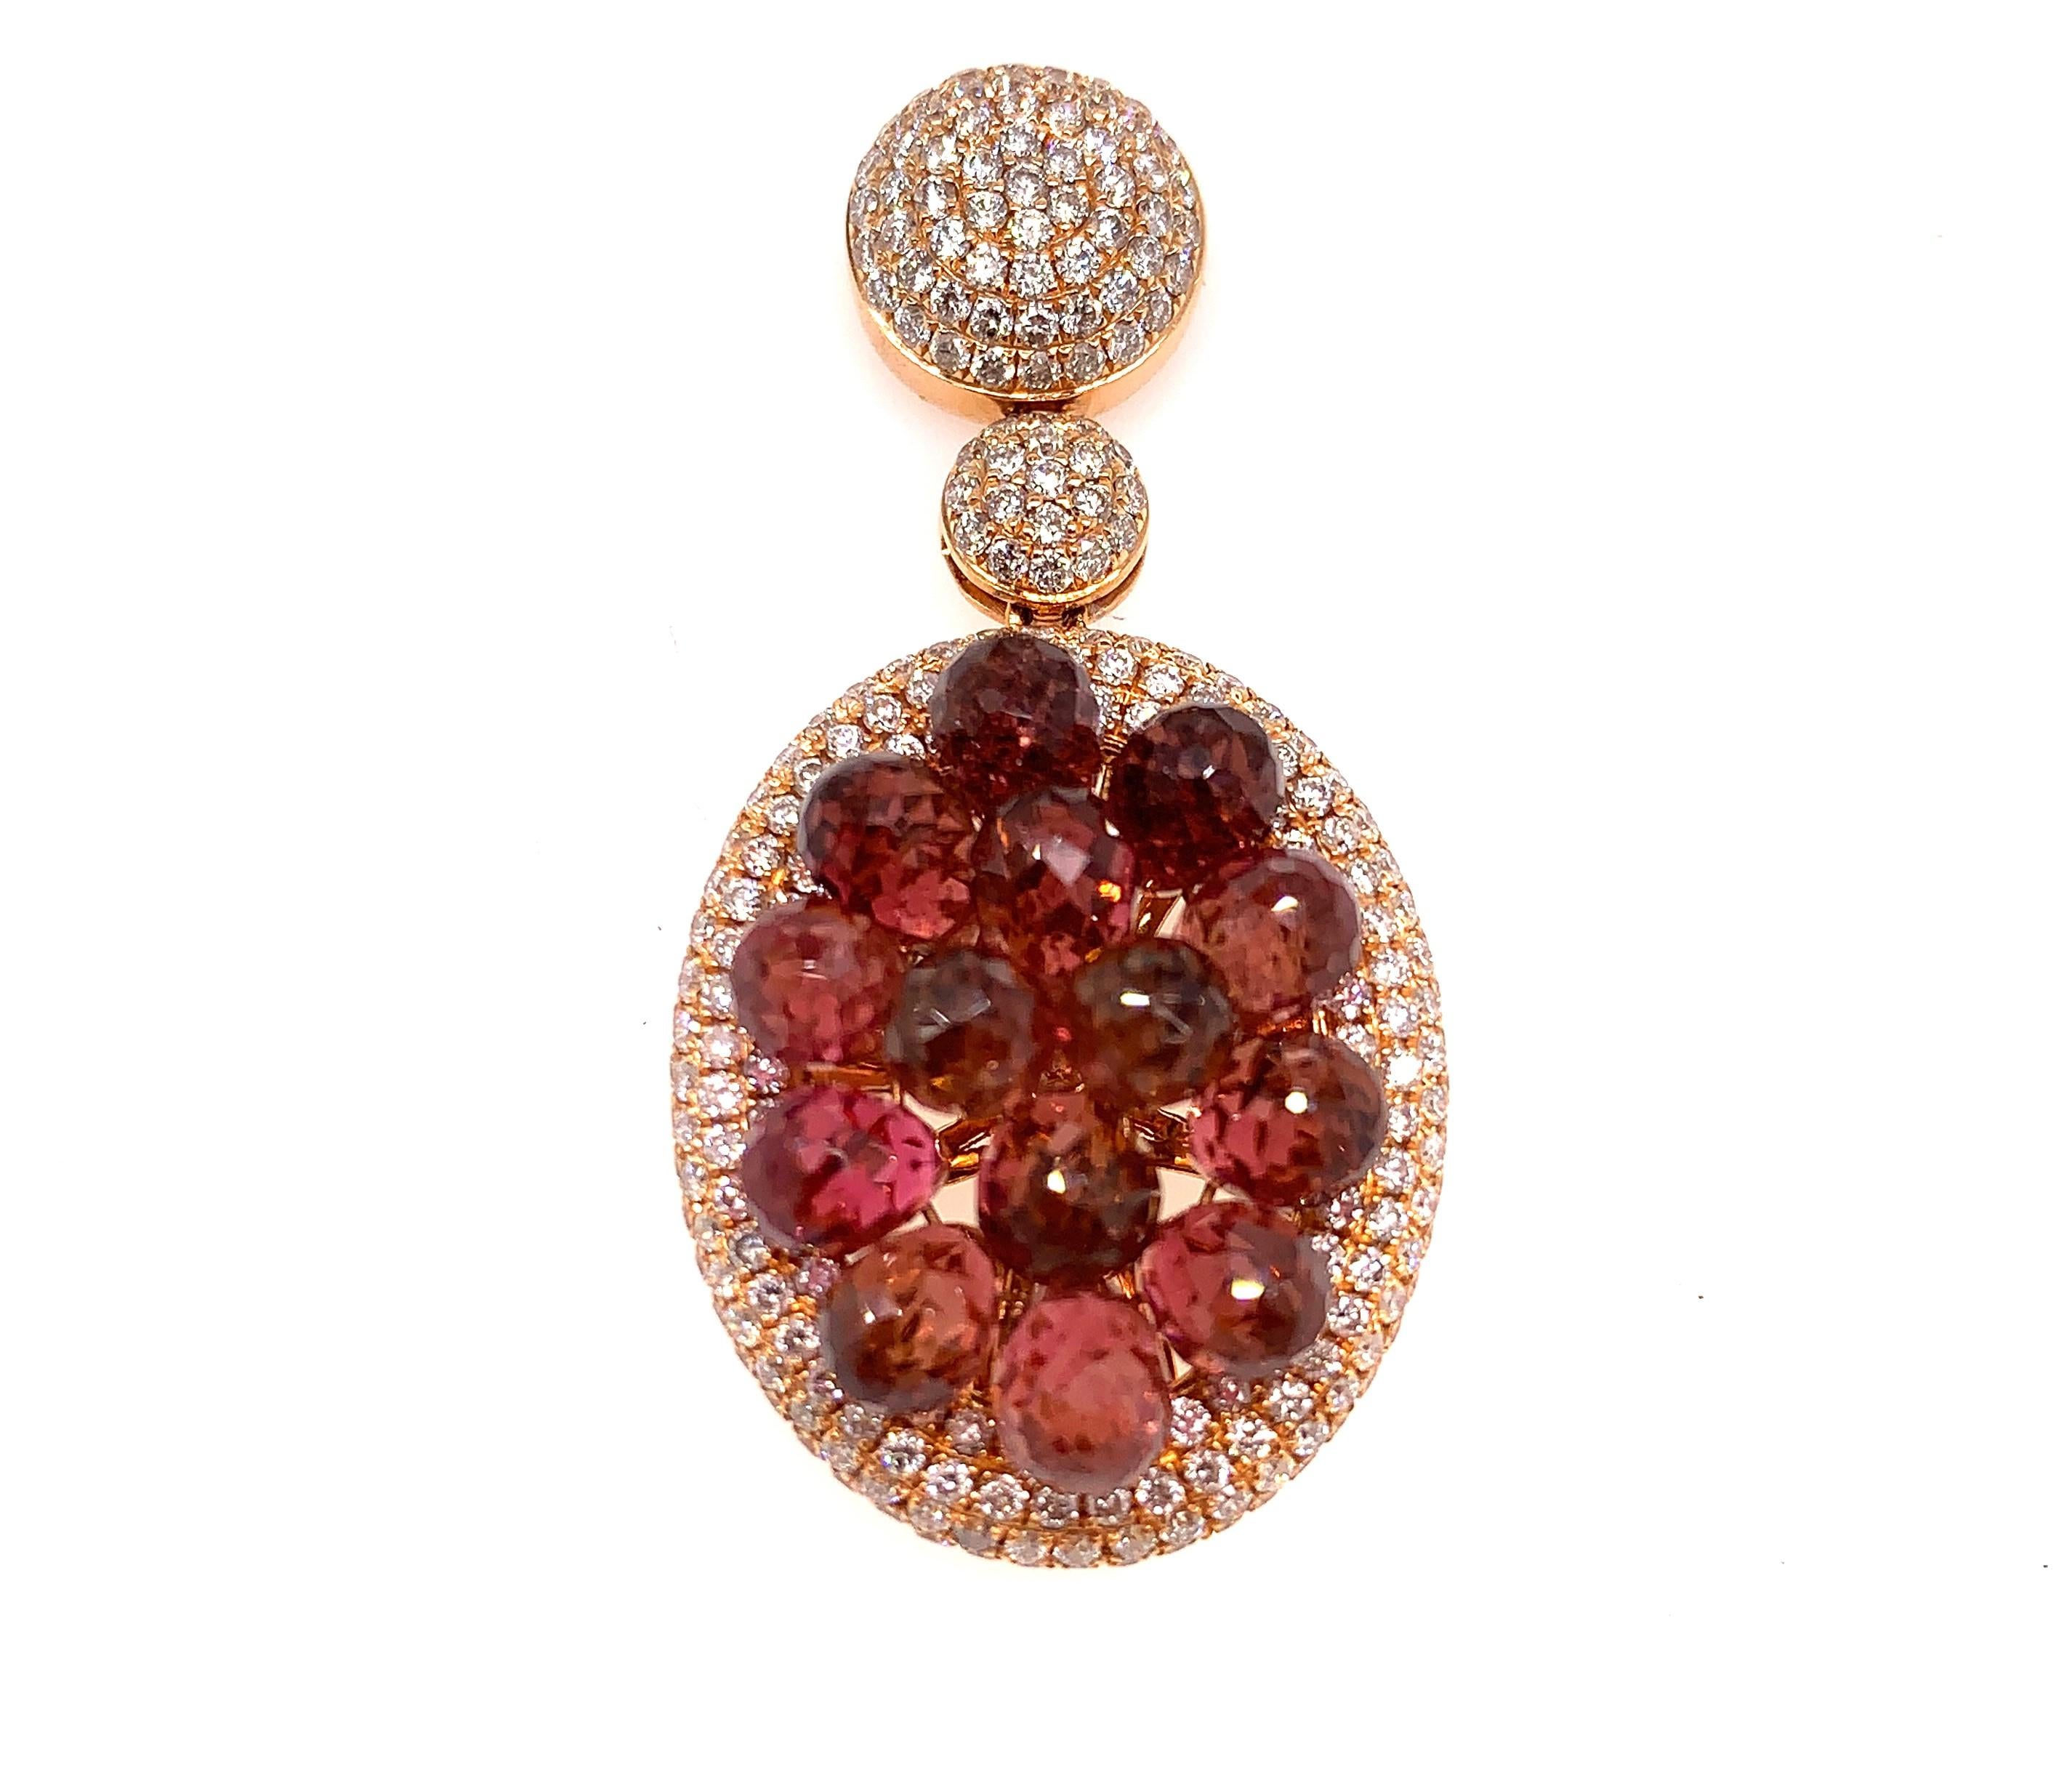 Contemporary 19.41 Carat Pink Tourmaline Earring in 18 Karat Rose Gold with Diamonds For Sale